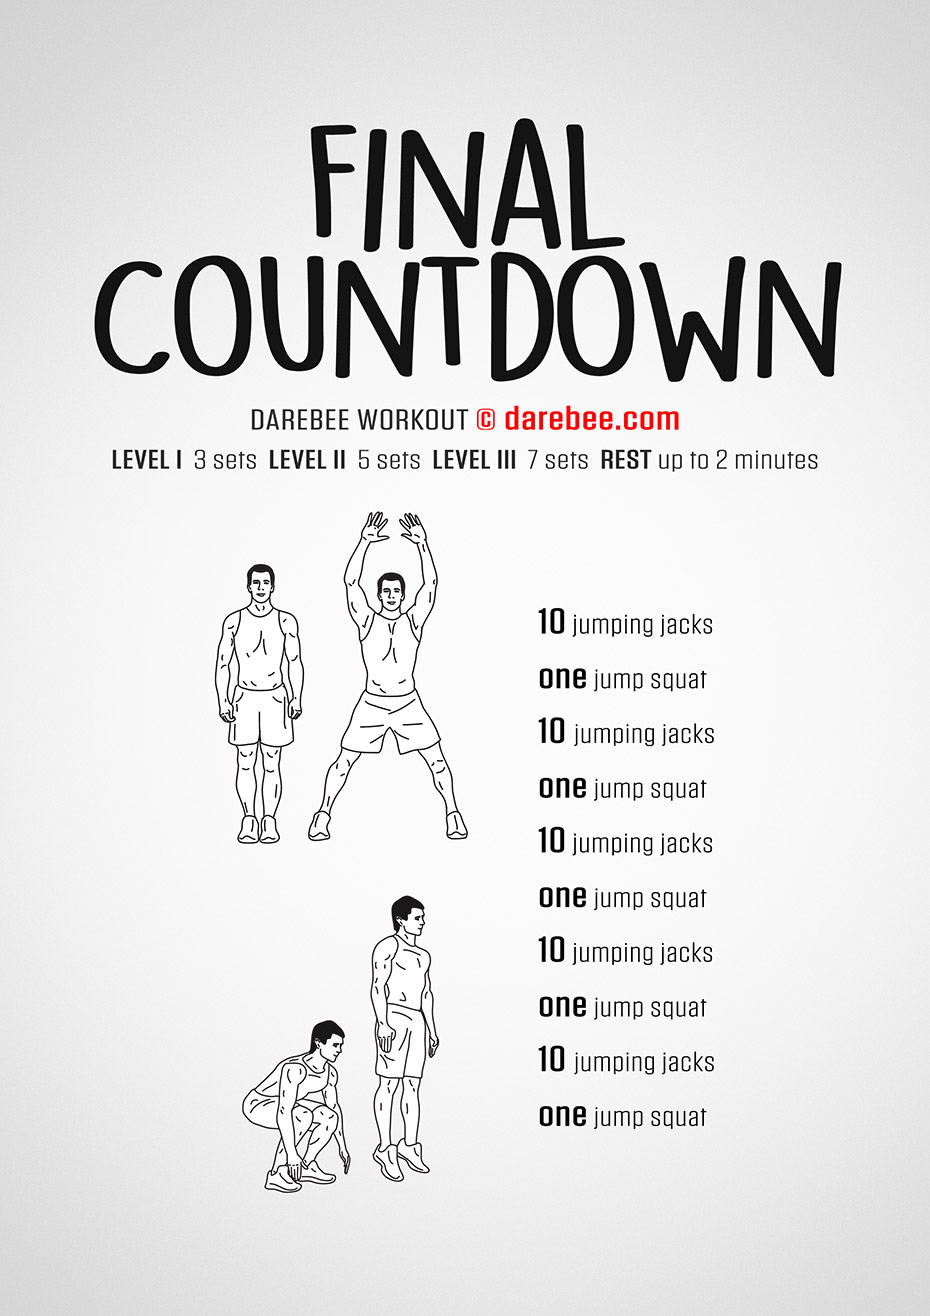 The Final Countdown Workout